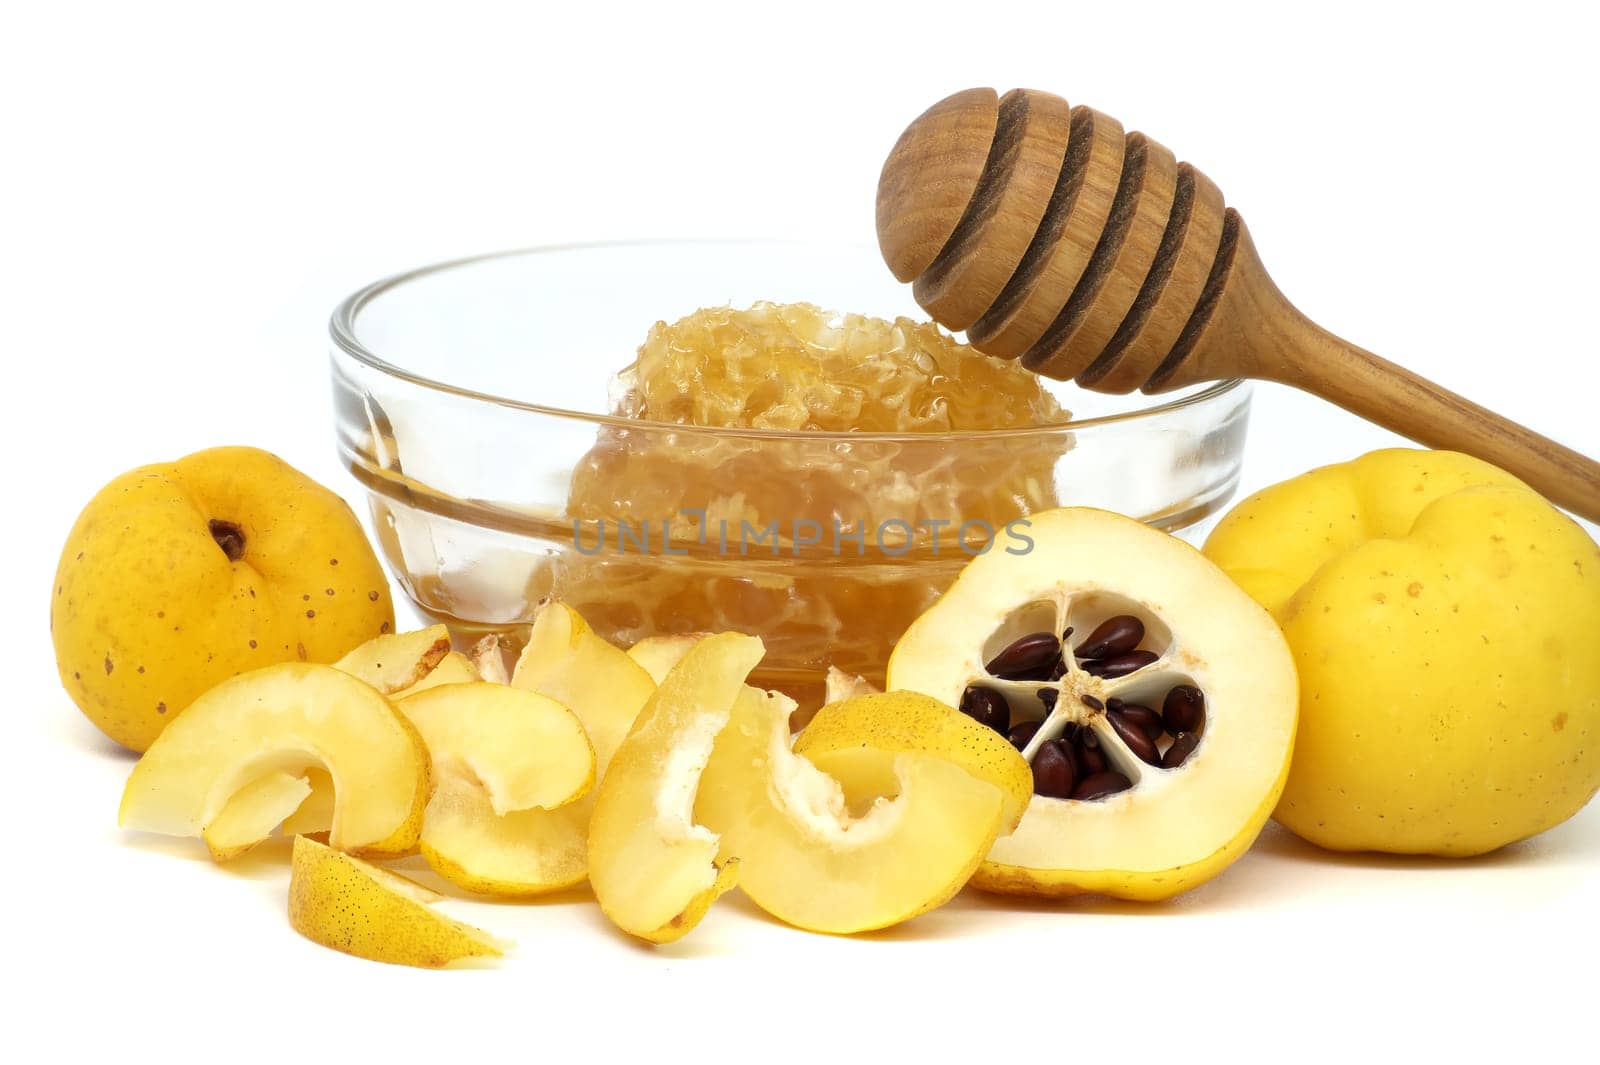 Glass bowl brimming with honey and wooden dipper resting on its rim surrounded by vibrant quince fruits, both sliced and whole isolated on white background, full depth of field